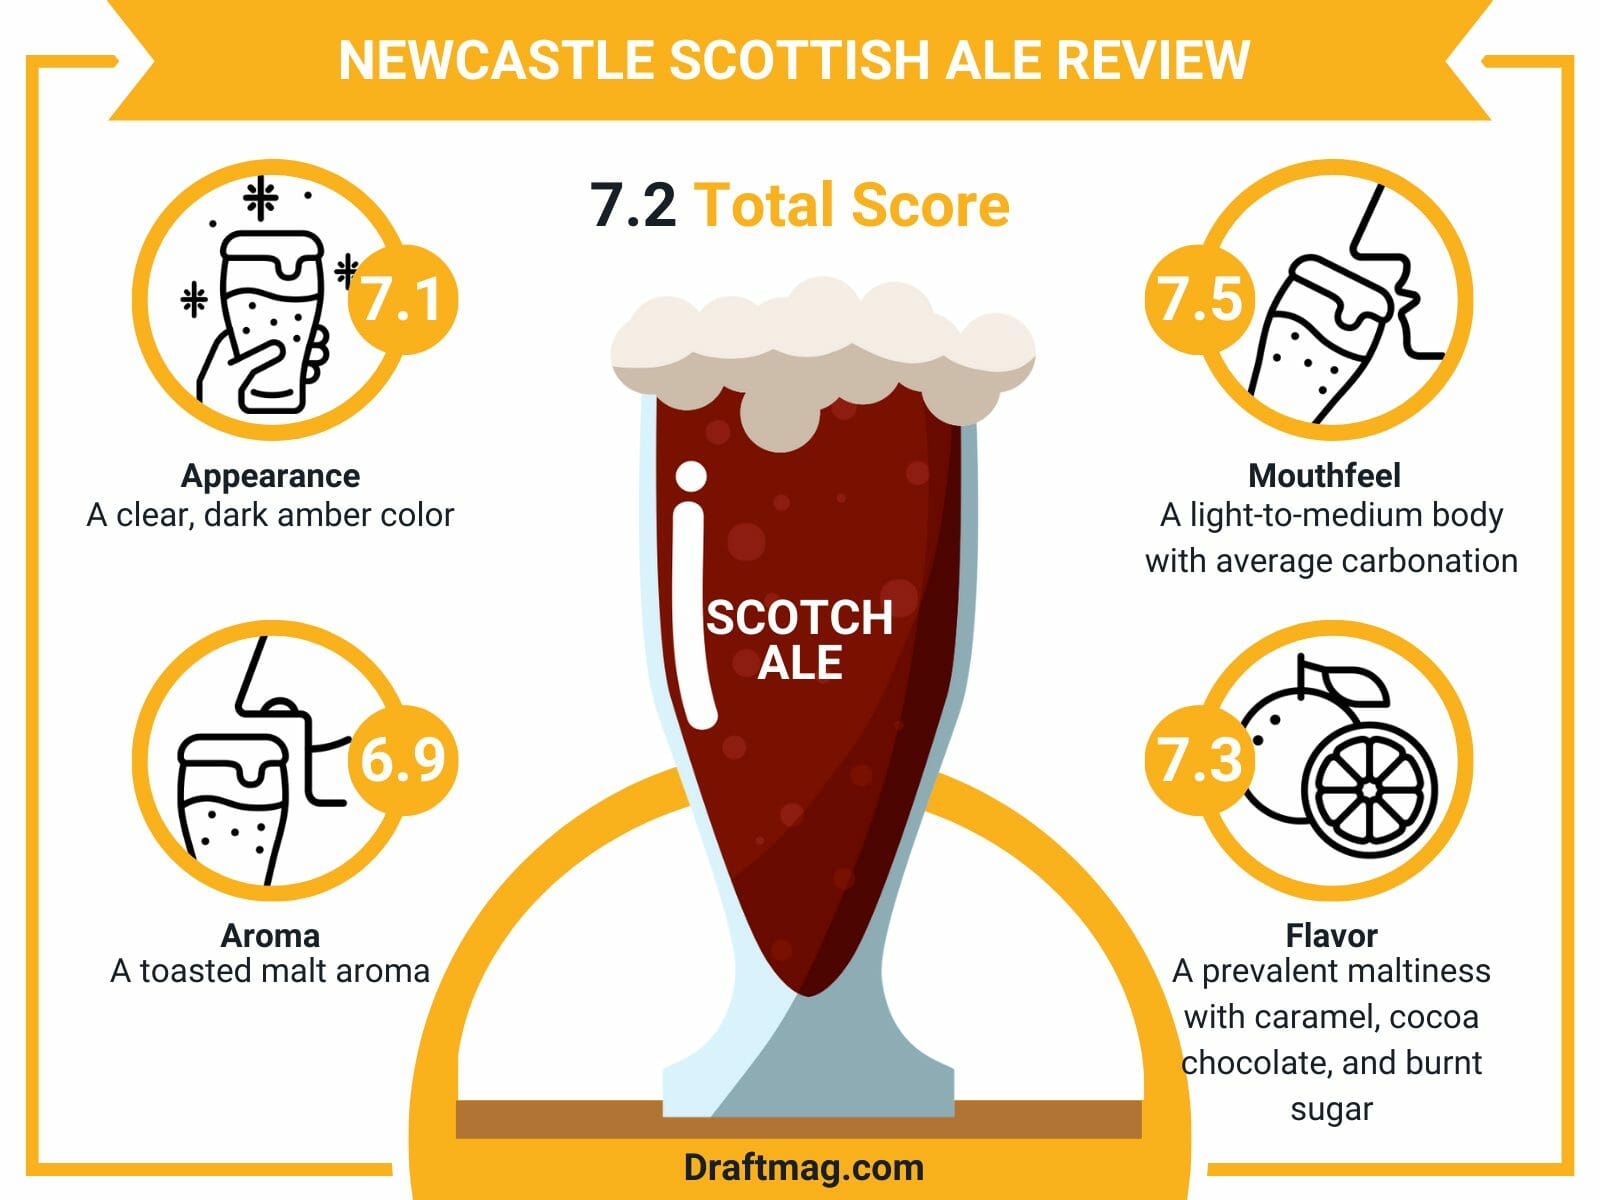 Newcastle scottish ale review infographic